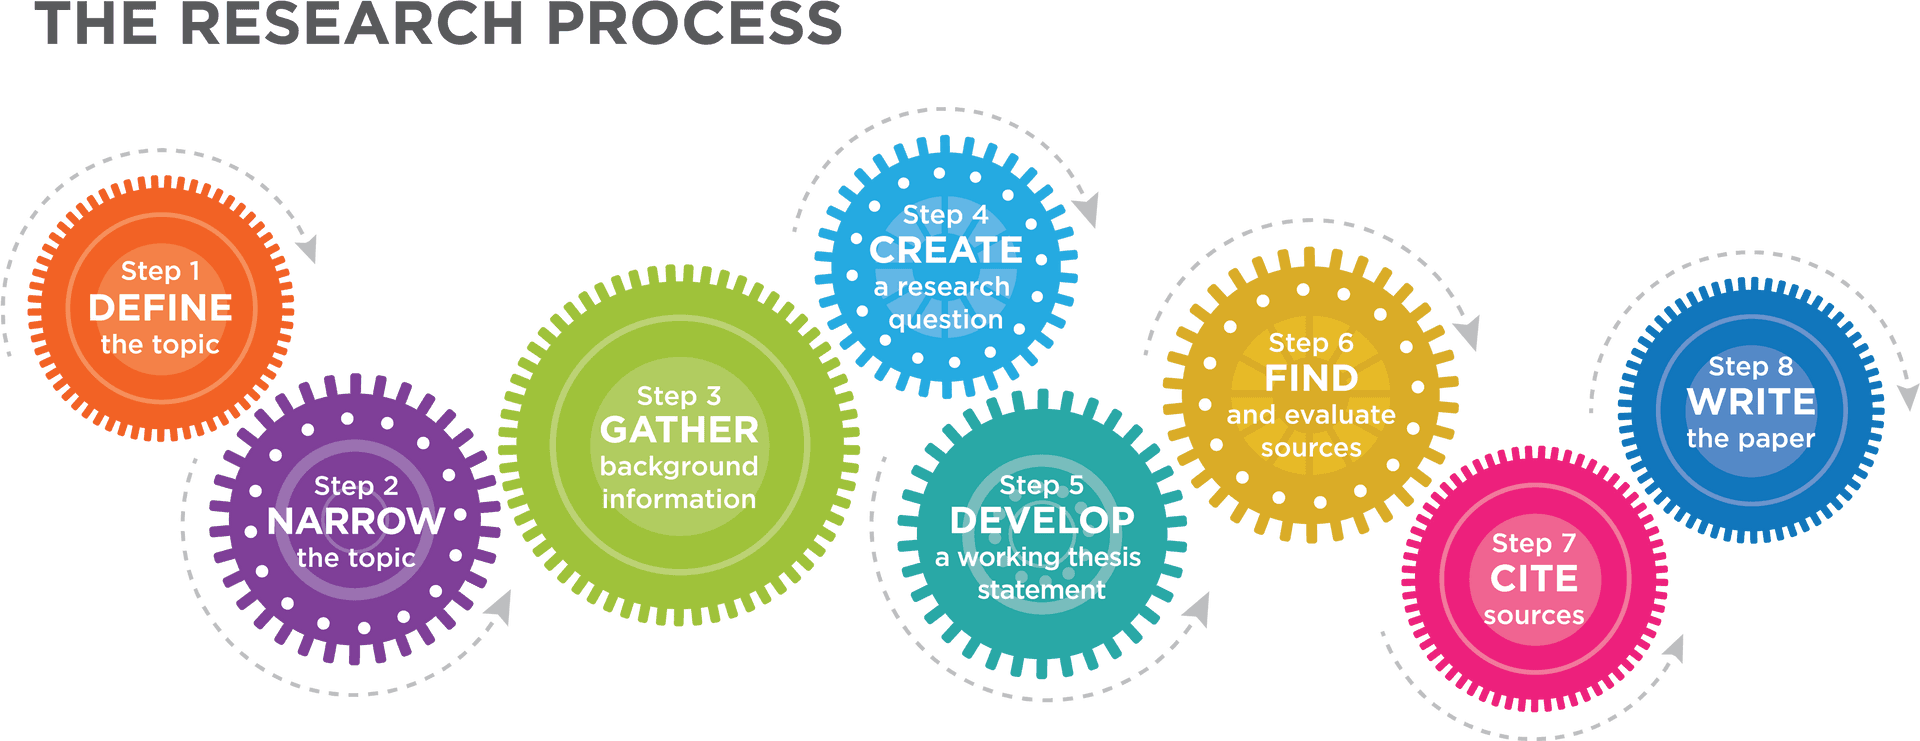 Research Process Infographic PNG